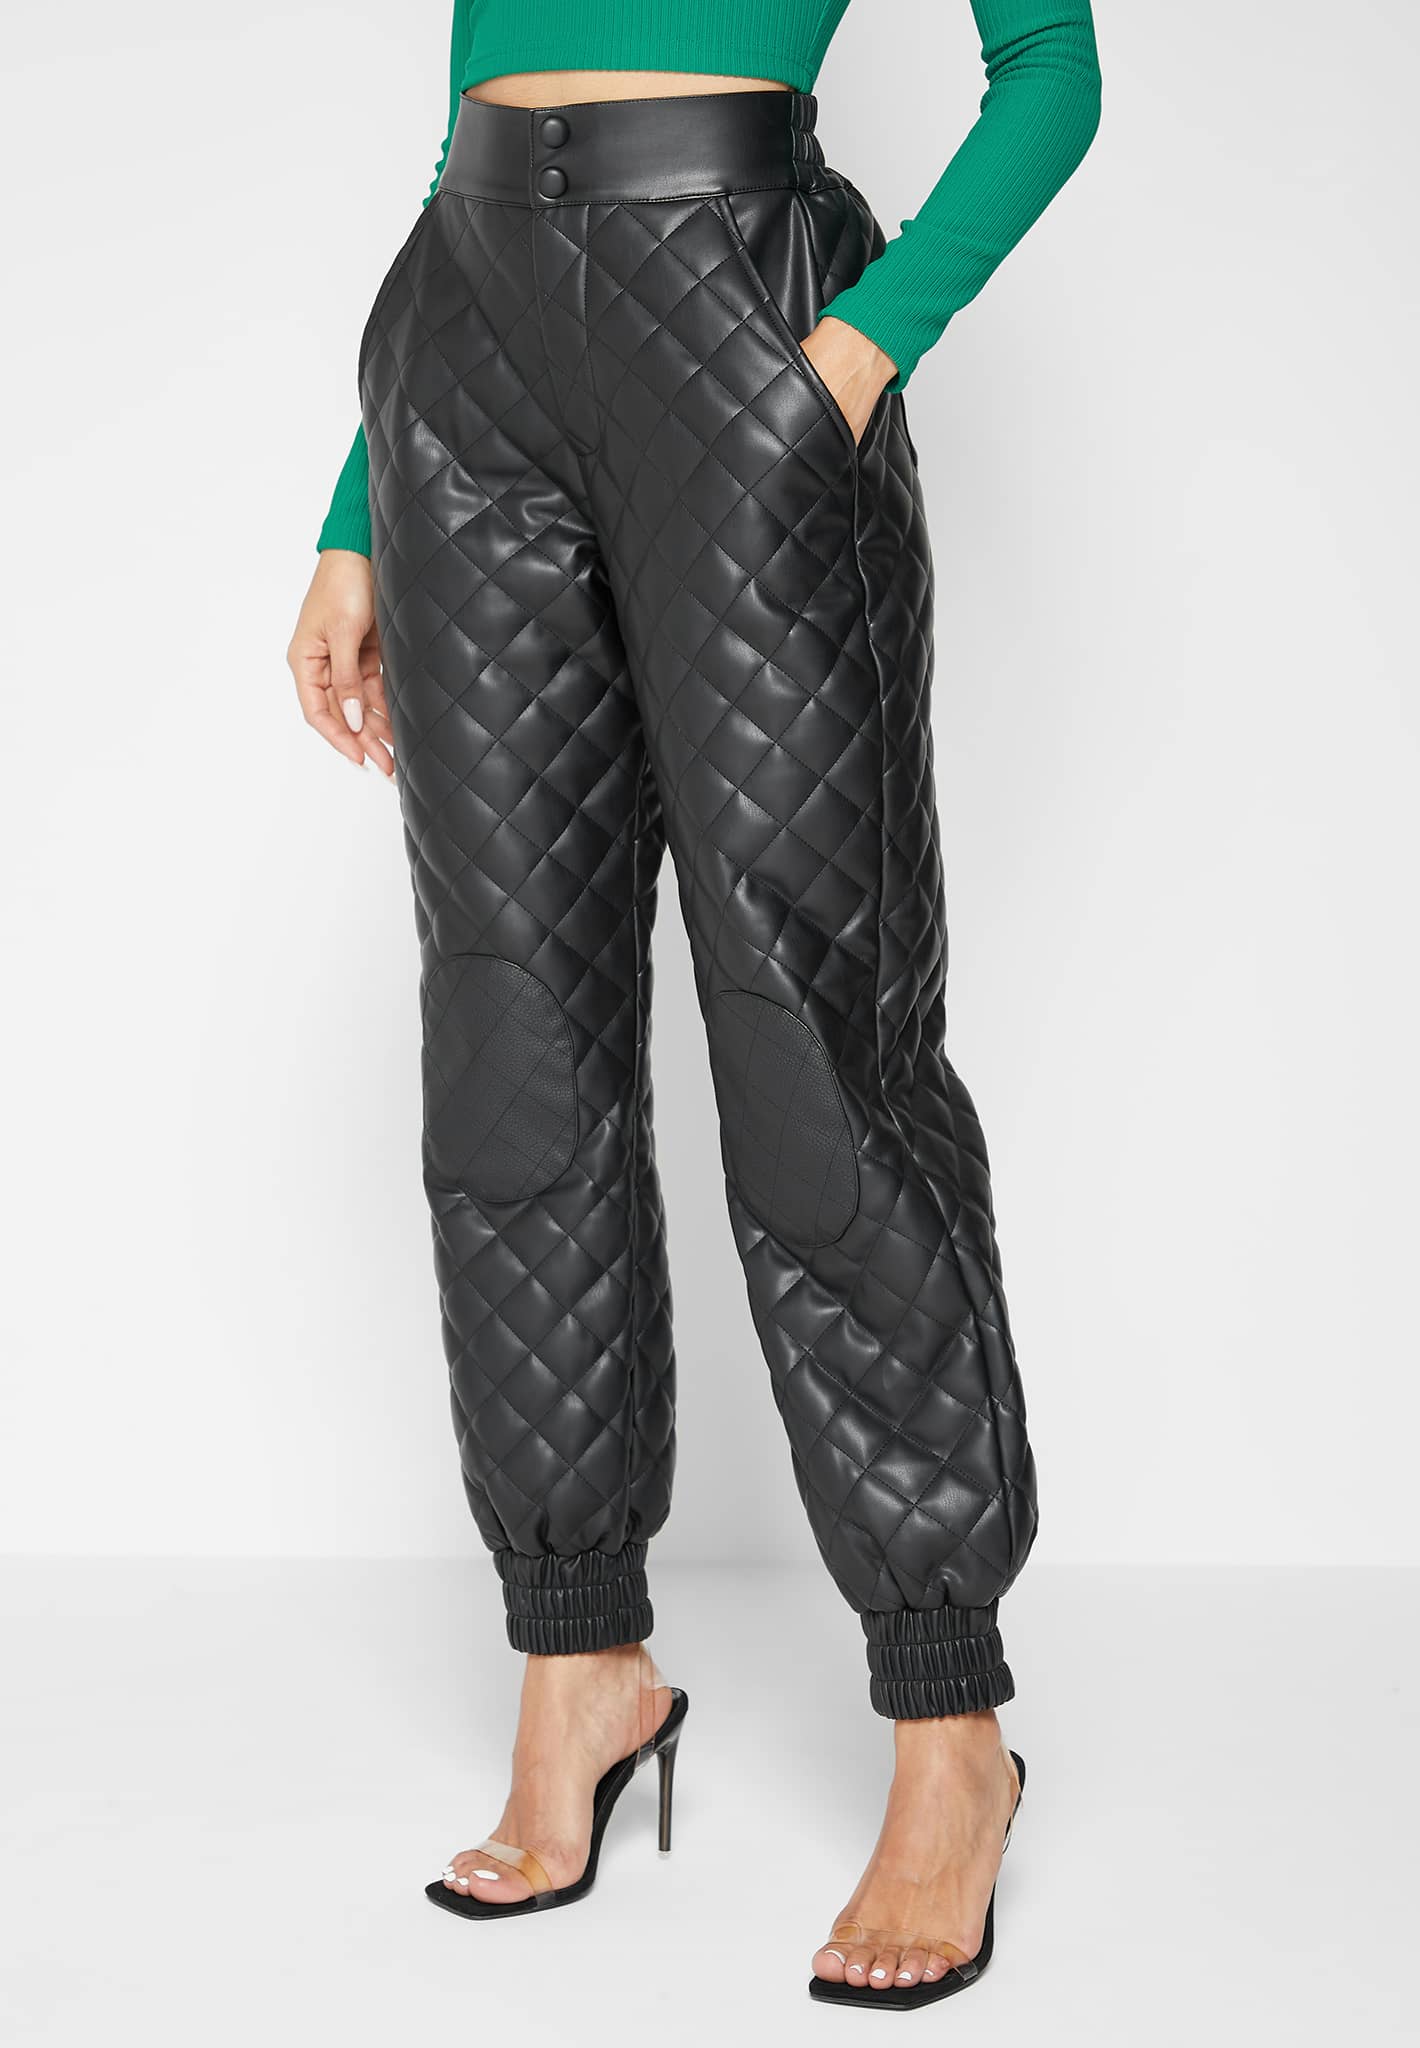 SPANX Faux Leather Quilted Leggings Very Black XS - Regular 26 at Amazon  Women's Clothing store